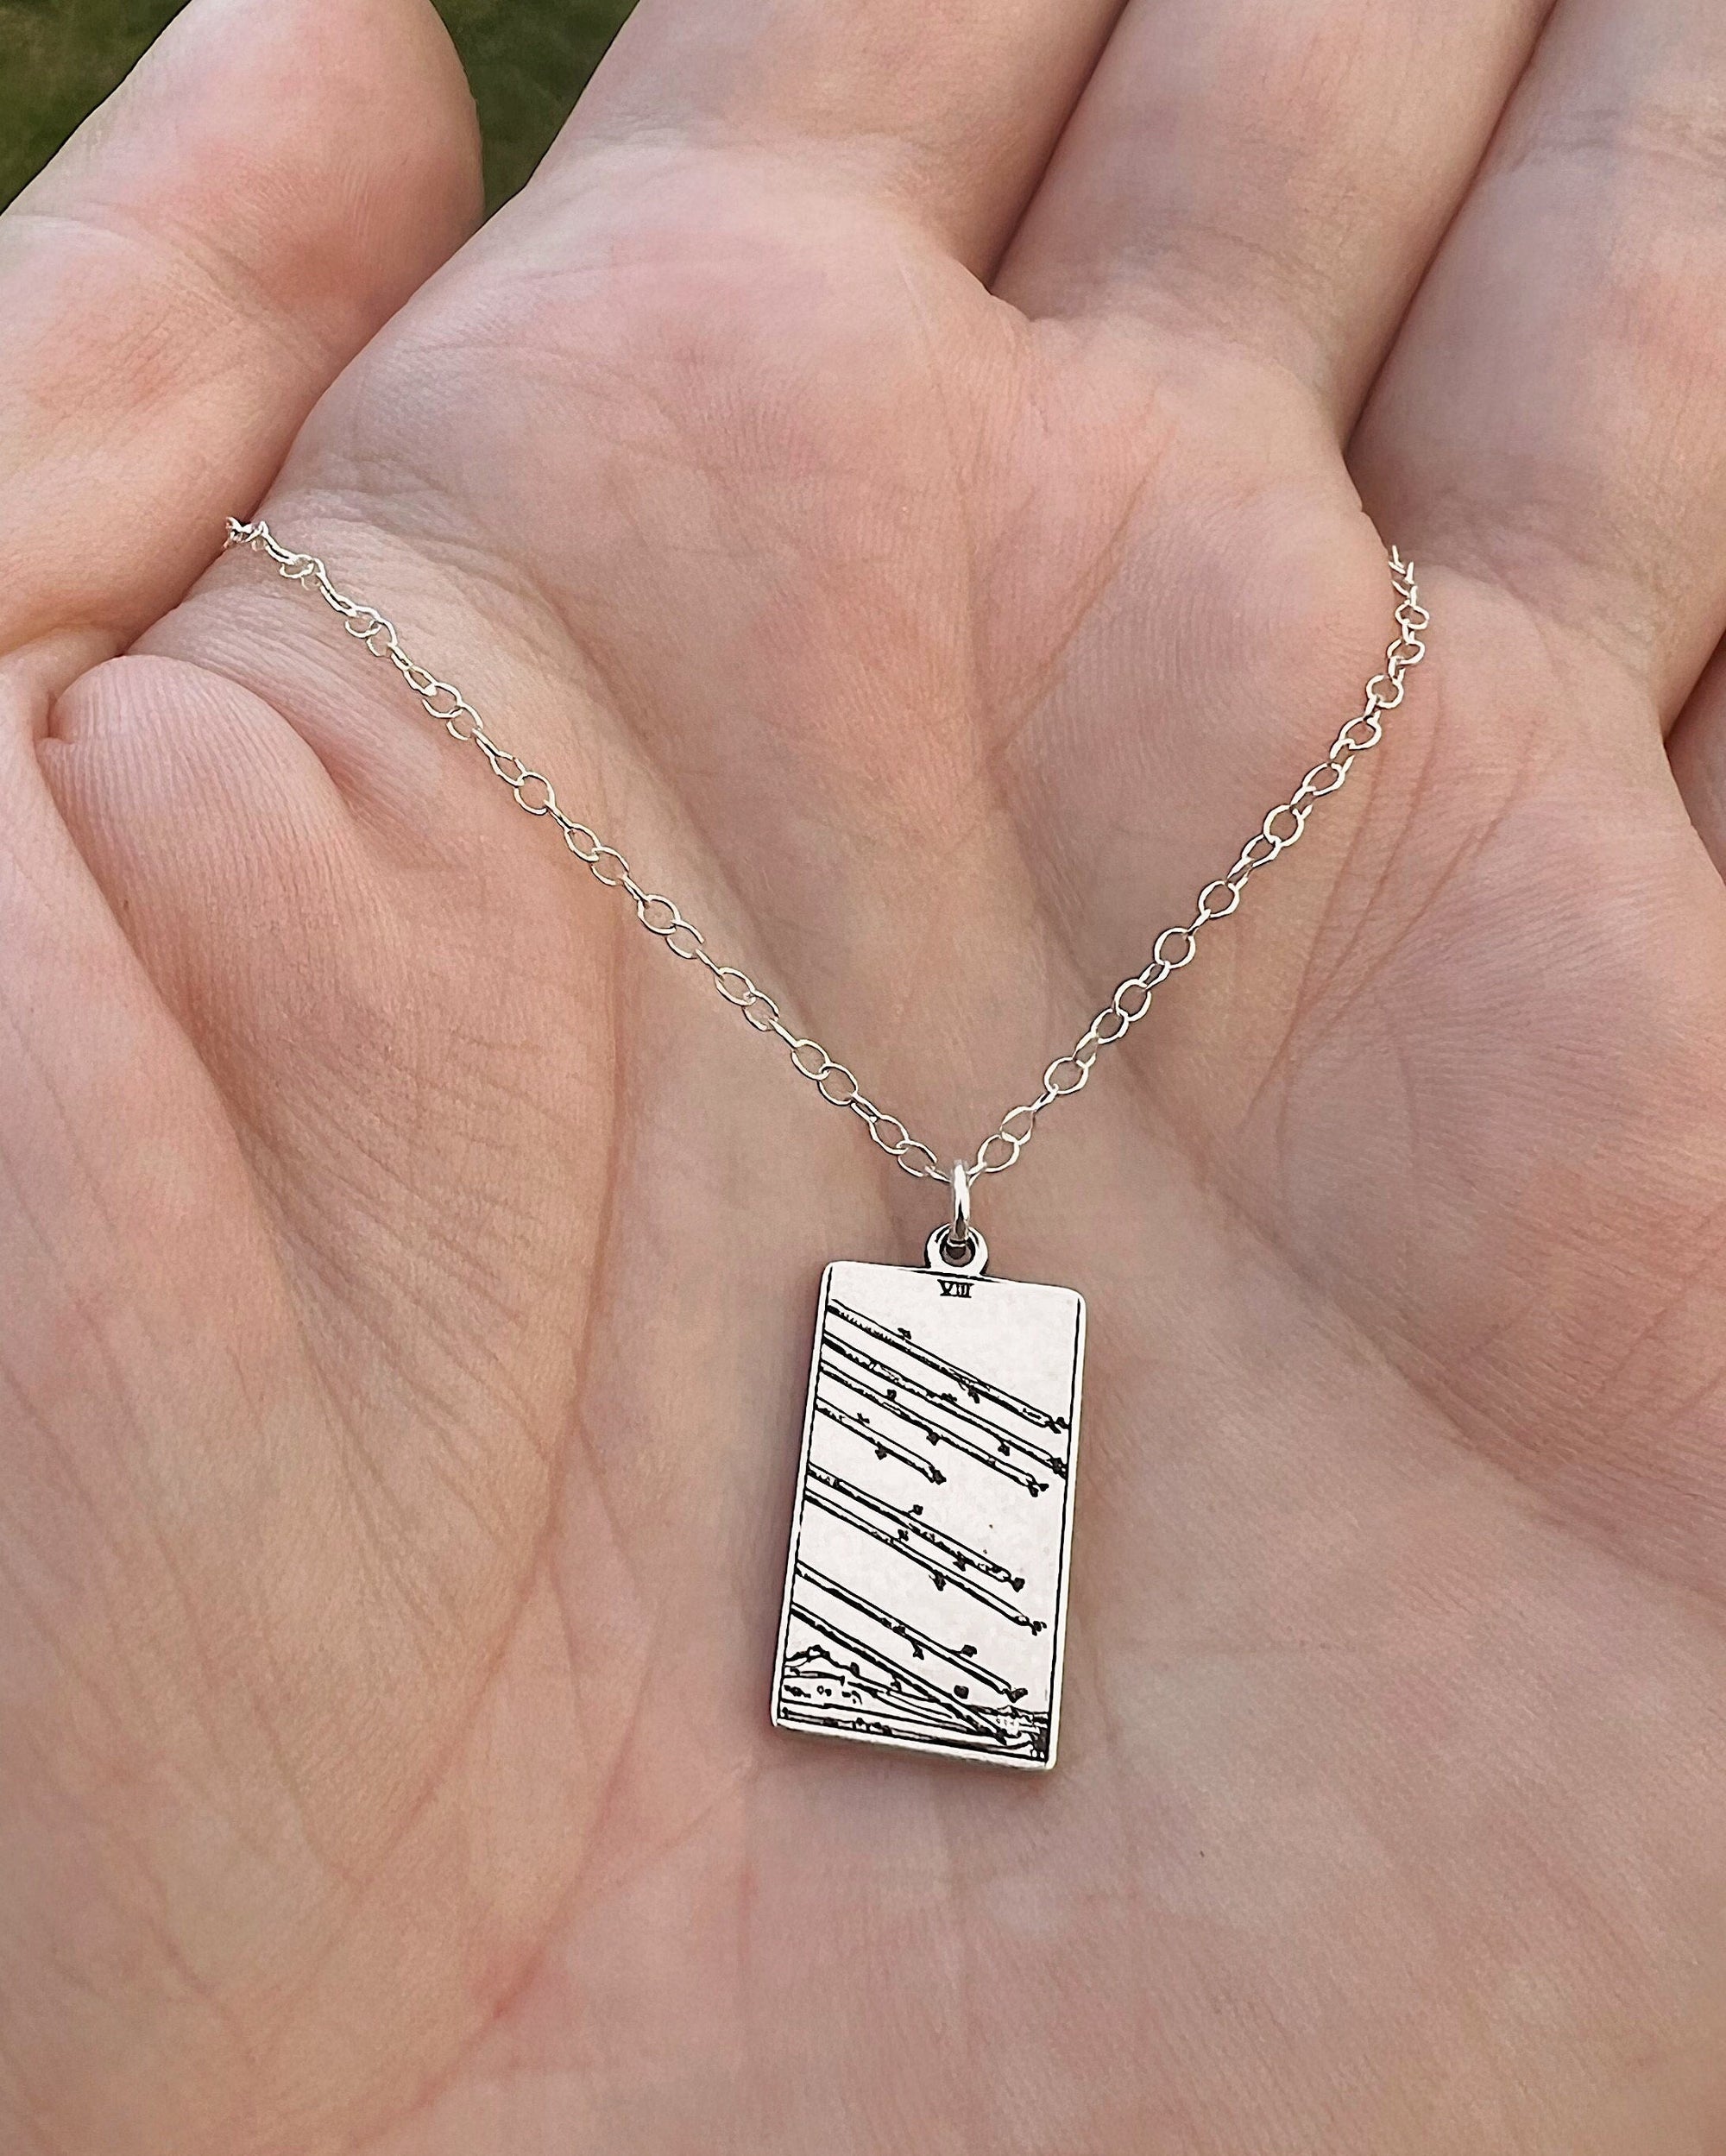 Eight of Wands Tarot Card Necklace - Sterling Silver